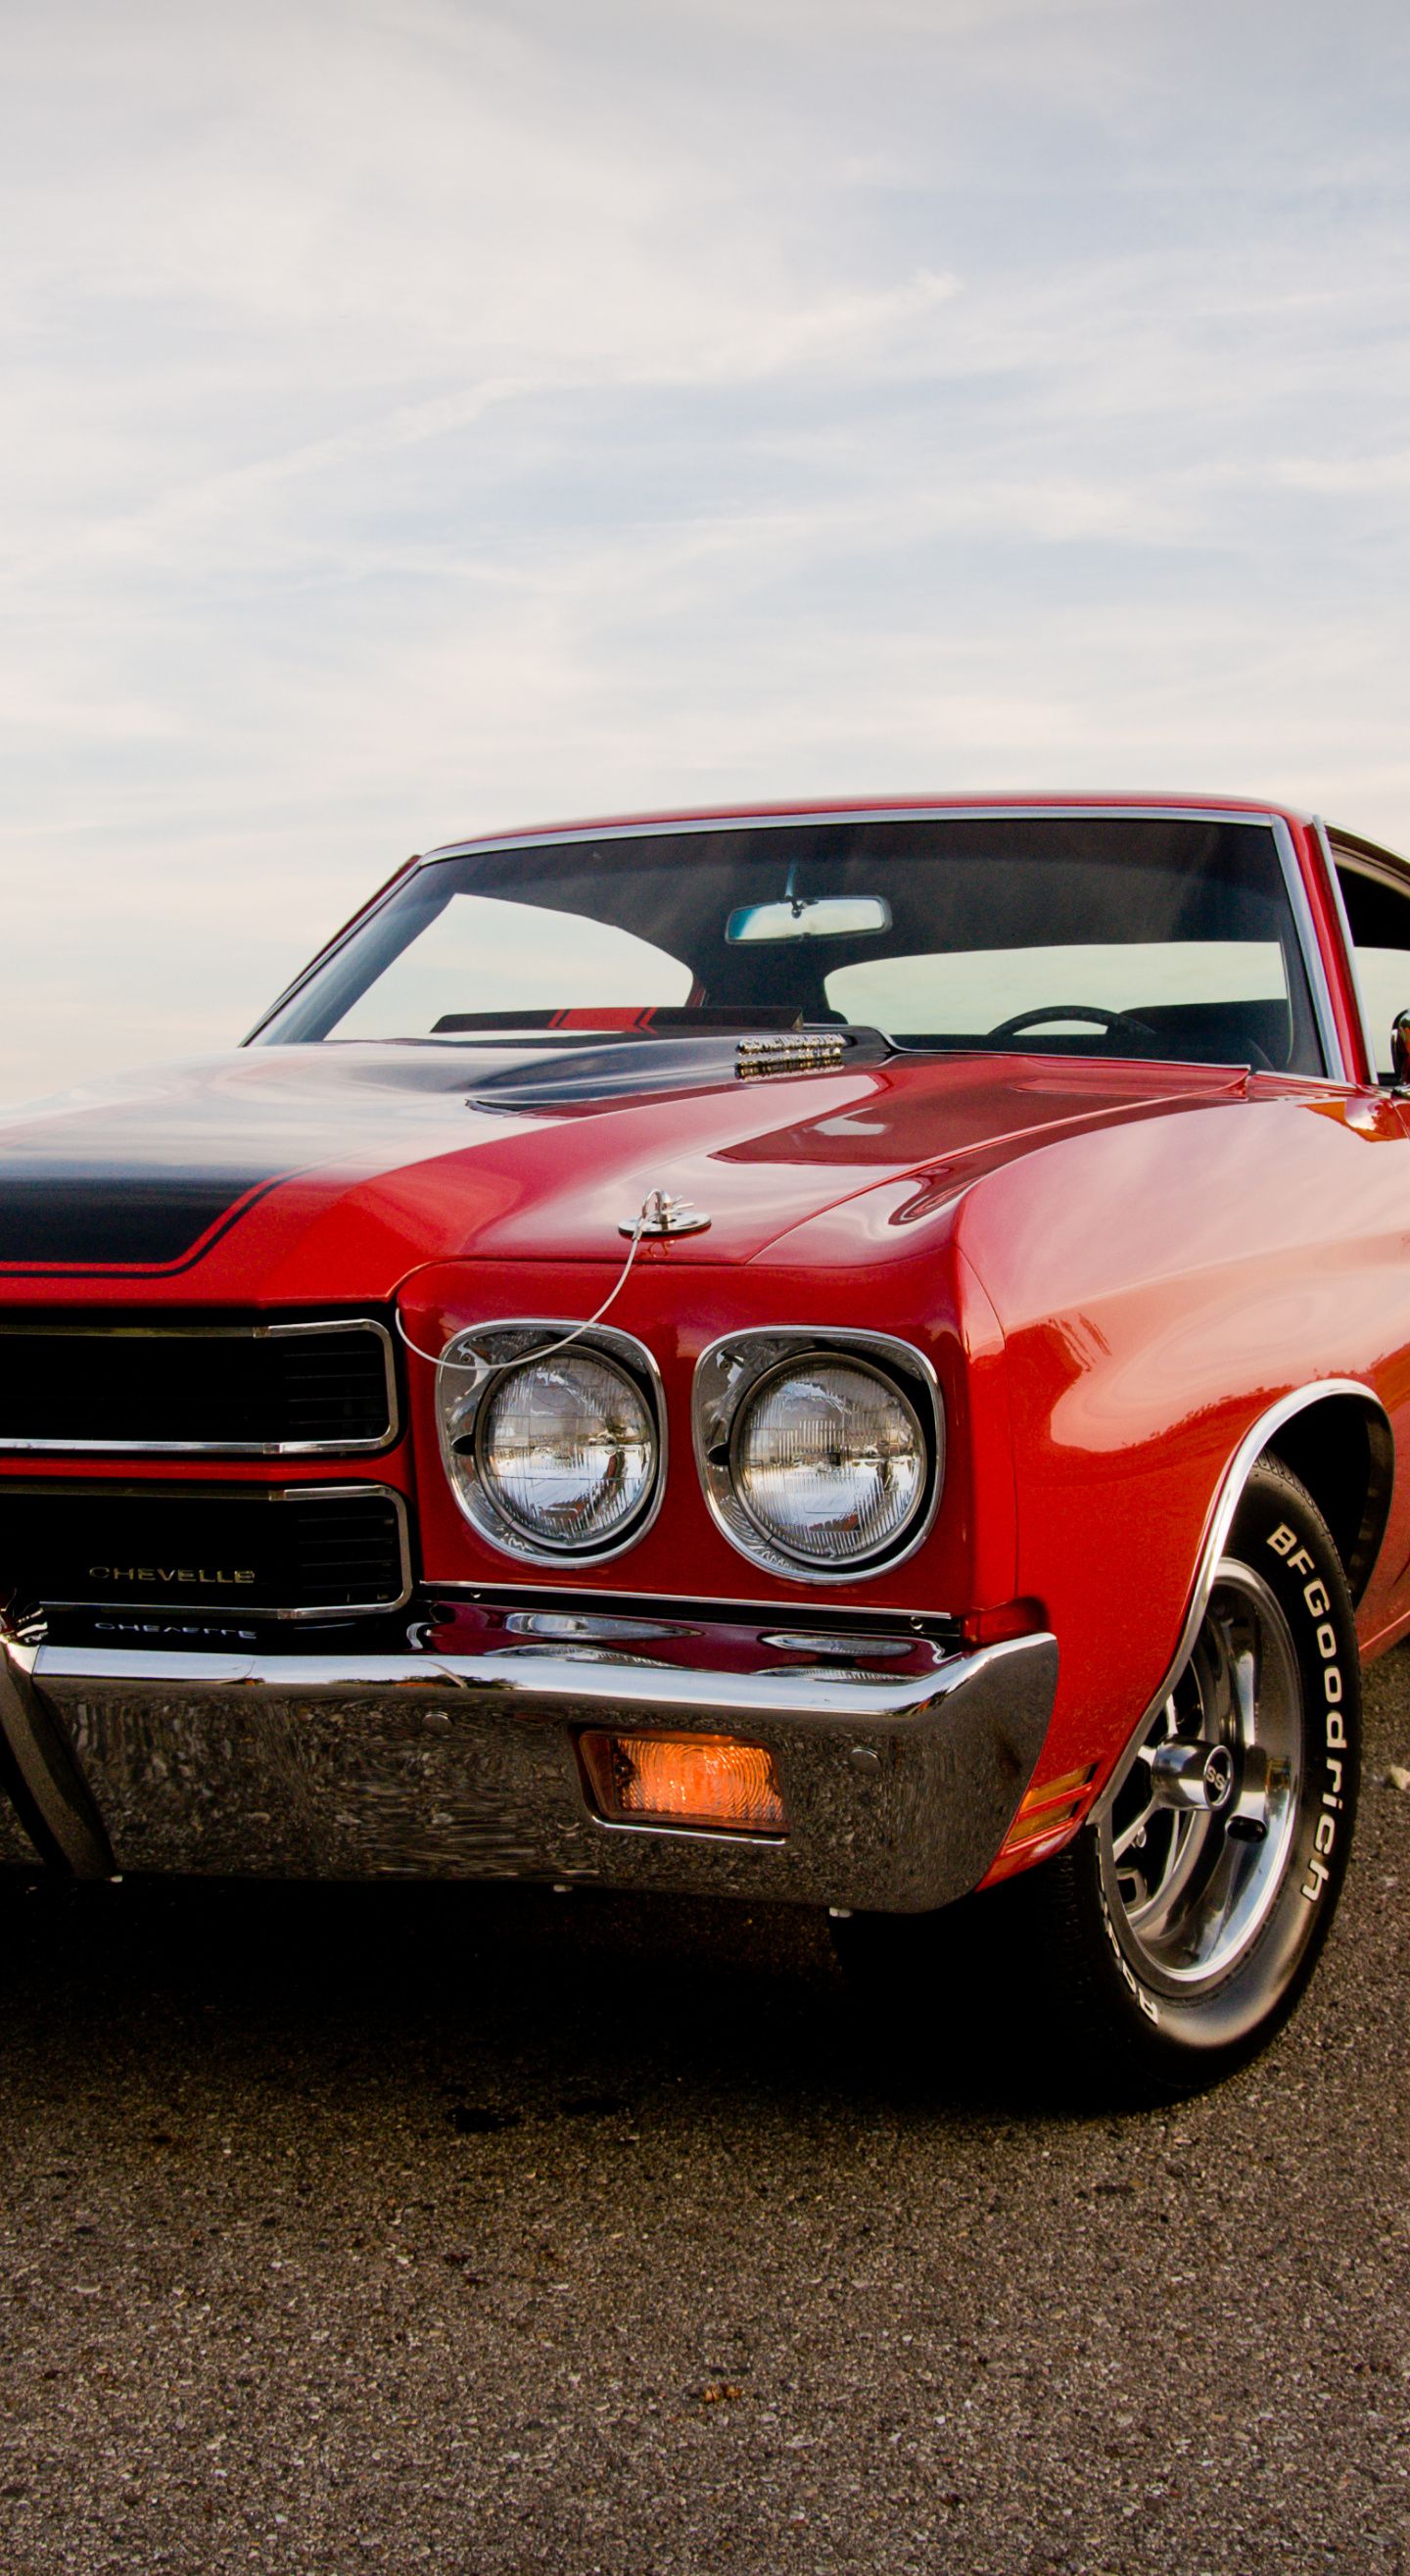 Download Classic, muscle car, Chevrolet .wallpapercan.com